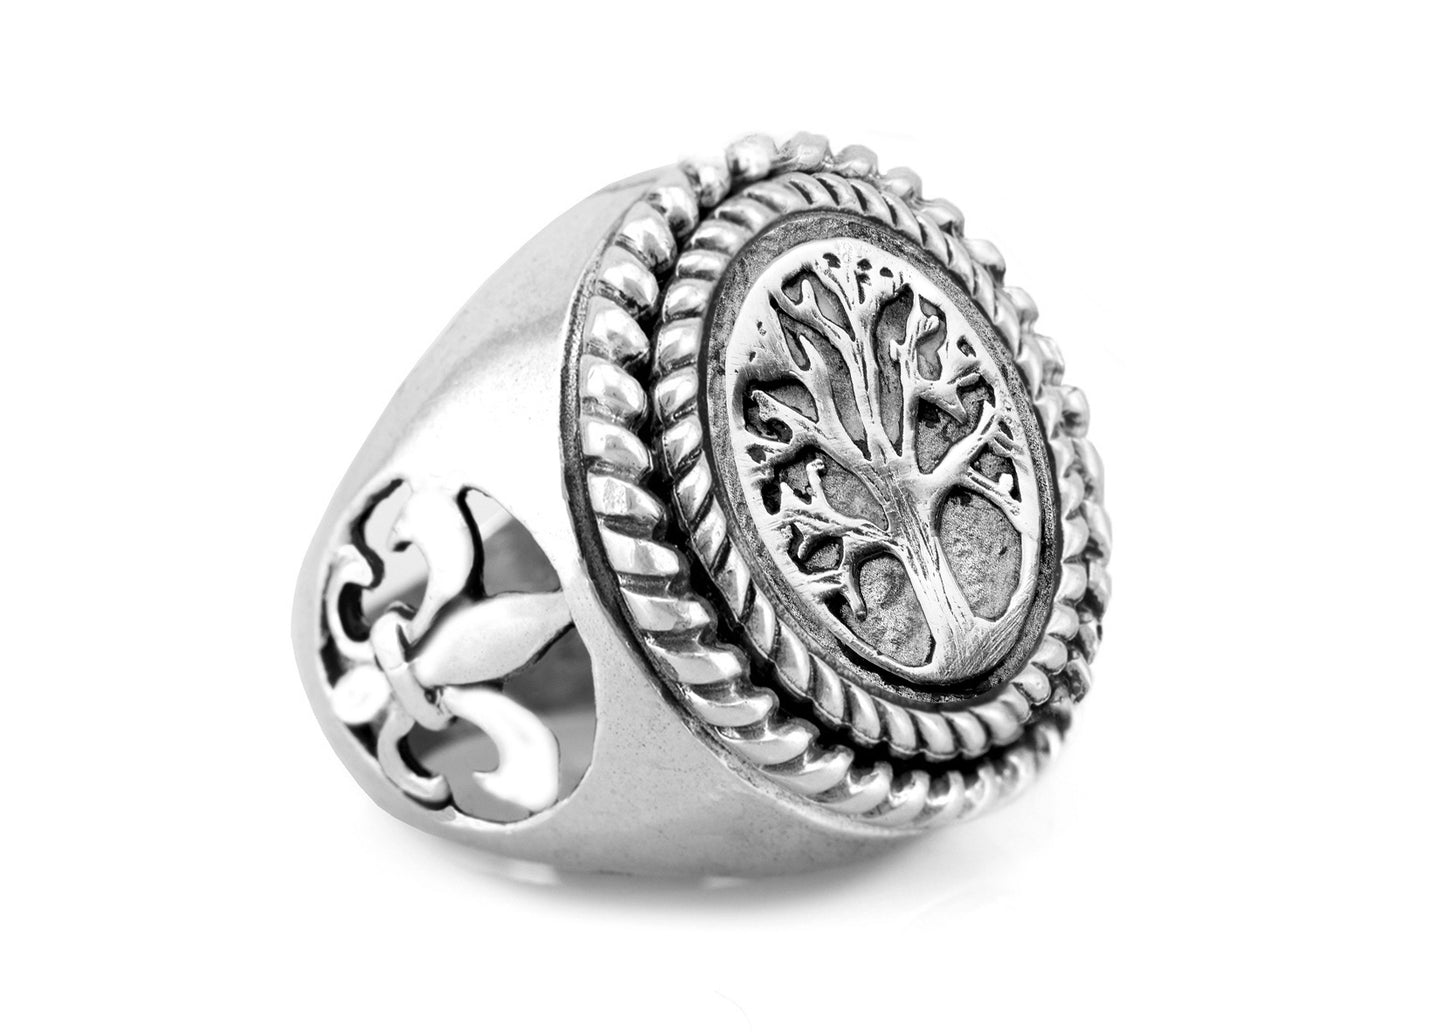 coin ring with the Tree medallion on fleur de lis ring